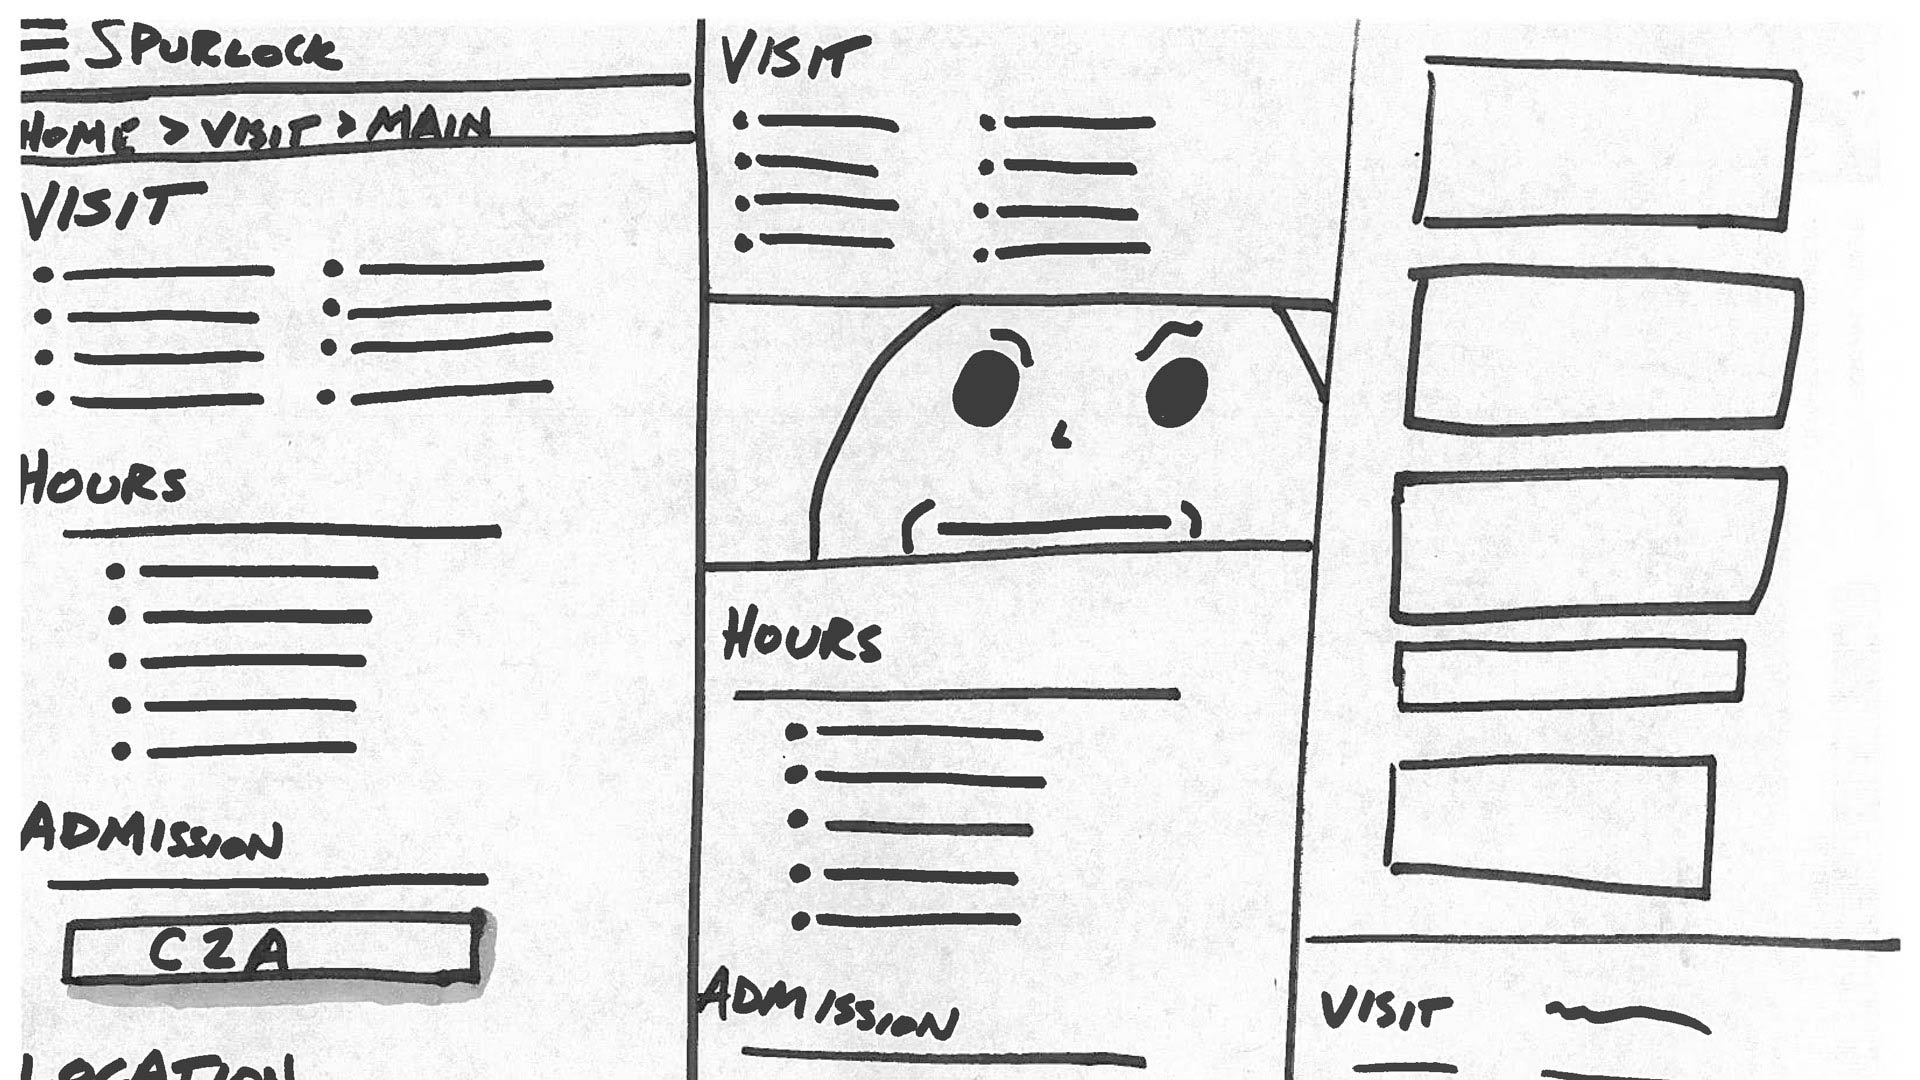 sketched design of Spurlock website with a drawn face in the middle of the page